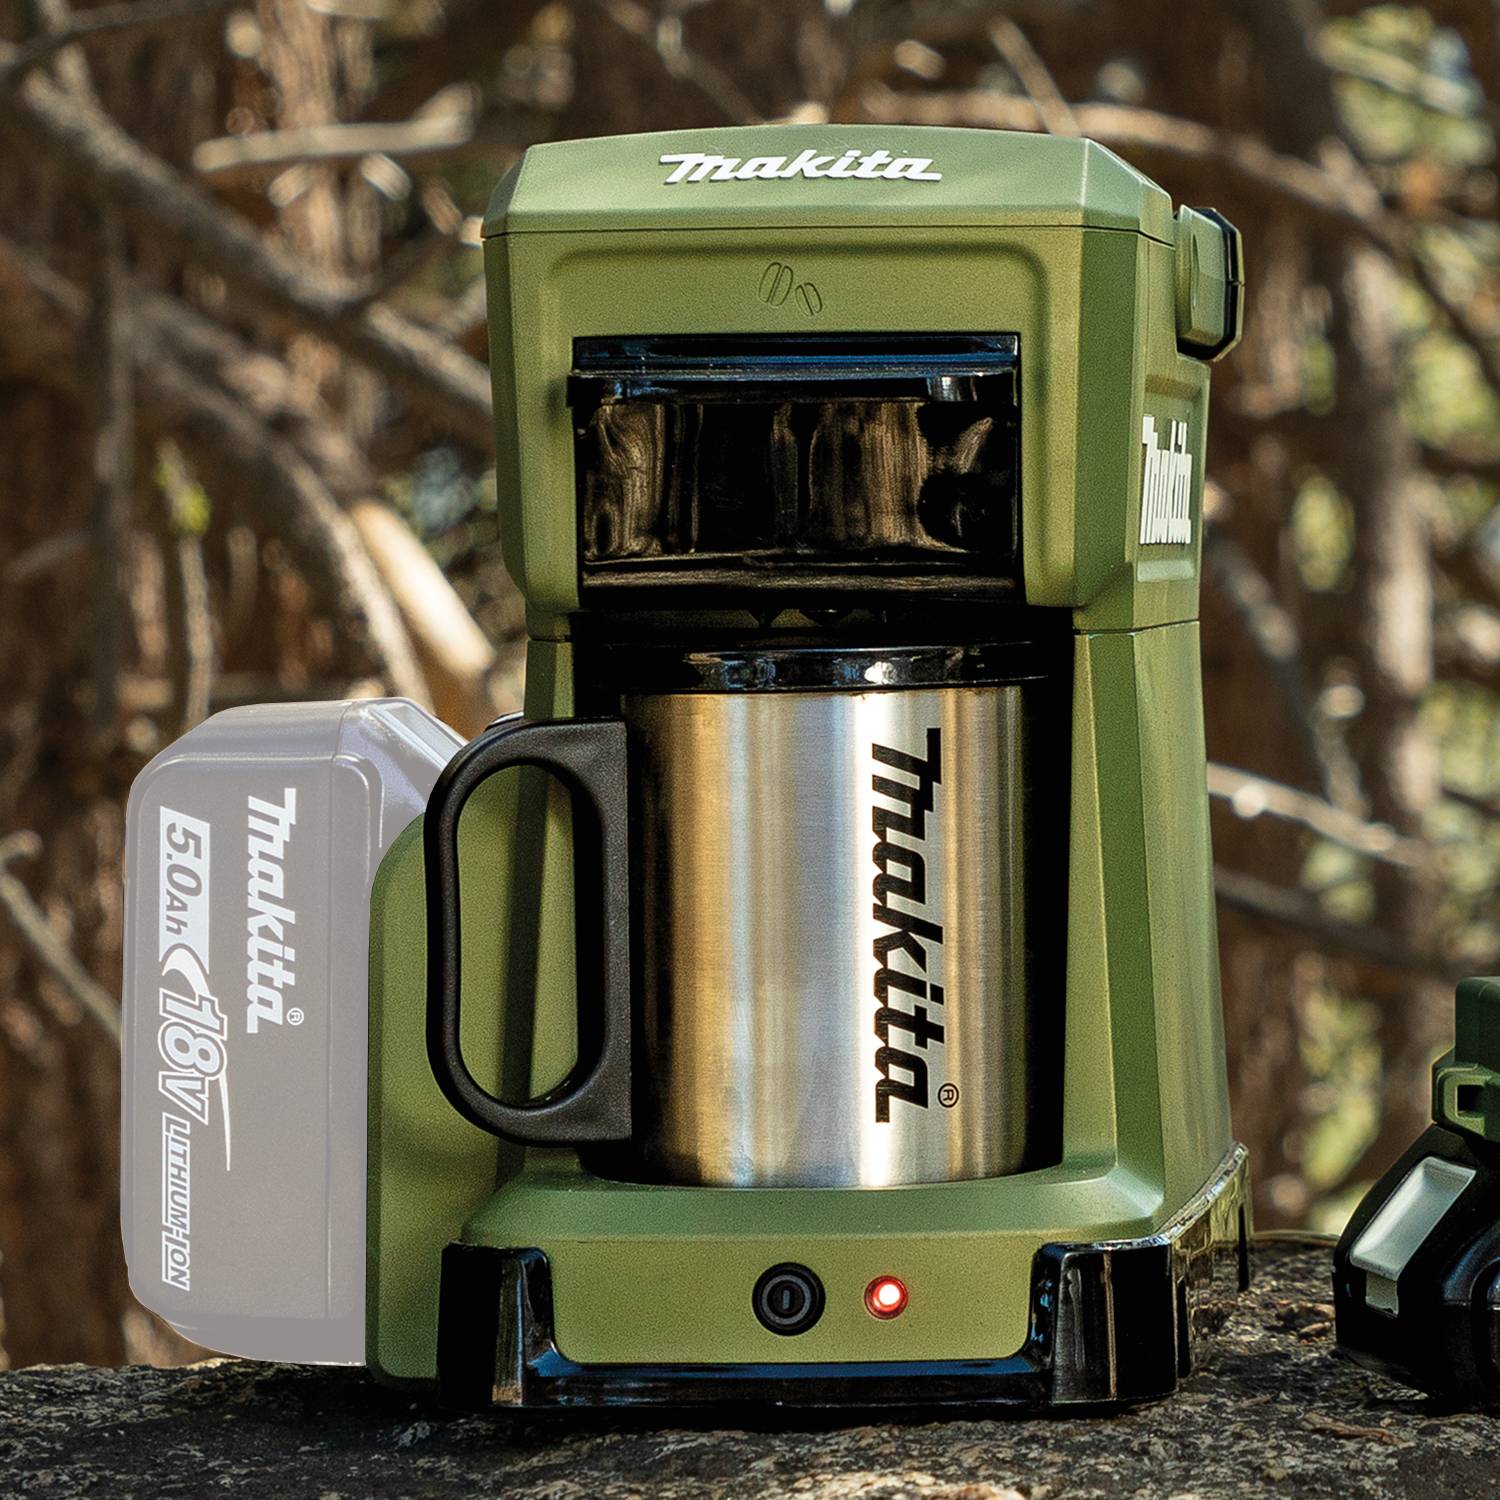 Makita ADCM501Z Outdoor Adventure 18V LXT Lithium-Ion Cordless Coffee Maker (Tool Only)